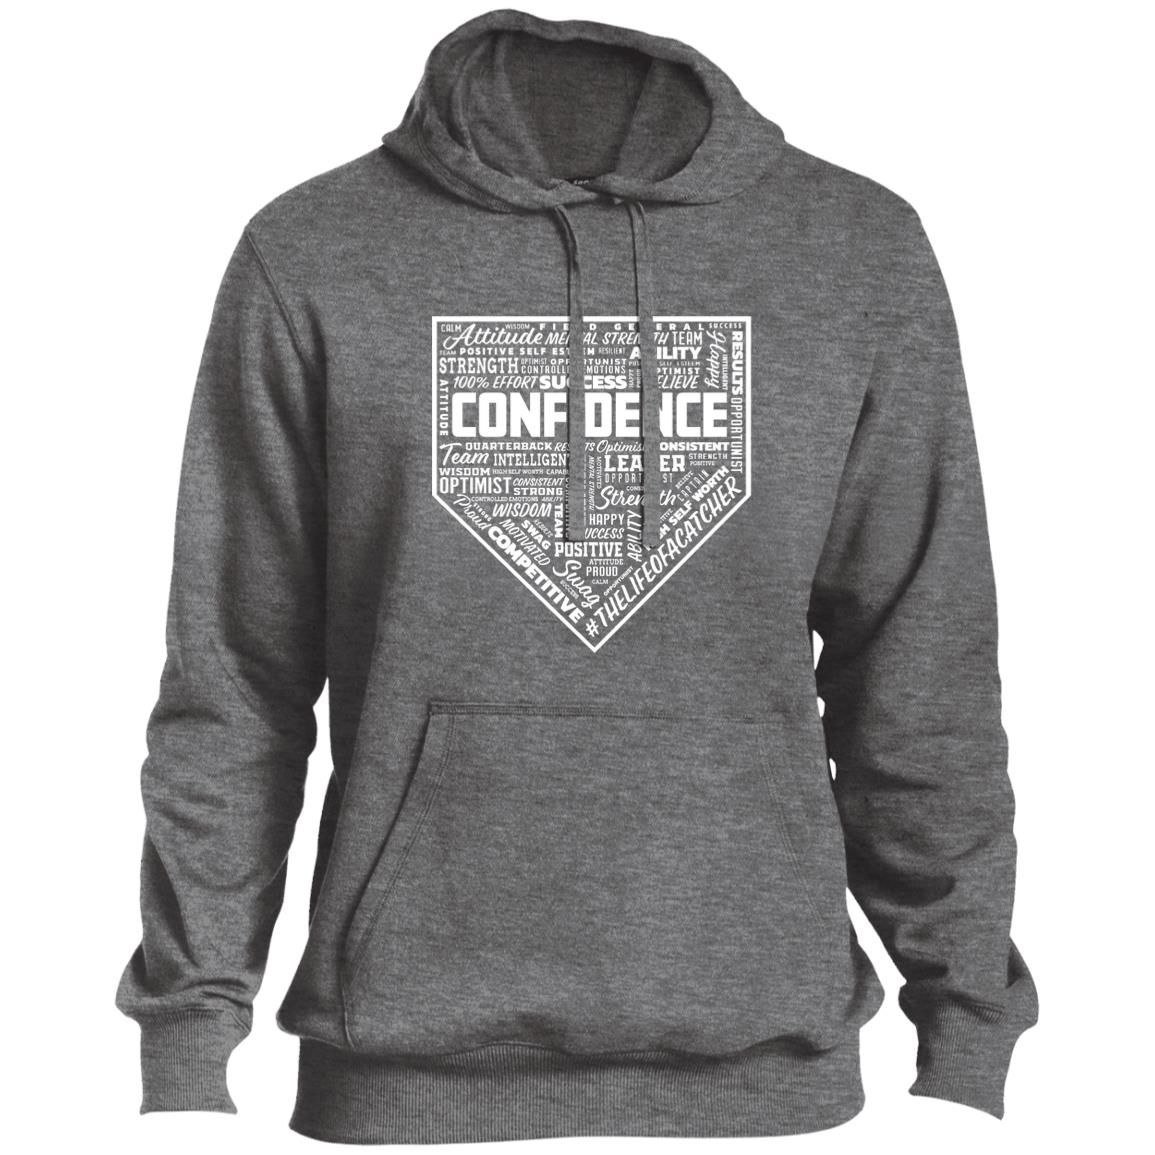 The Catching Guy Catcher Confidence Pullover Hoodie in grey